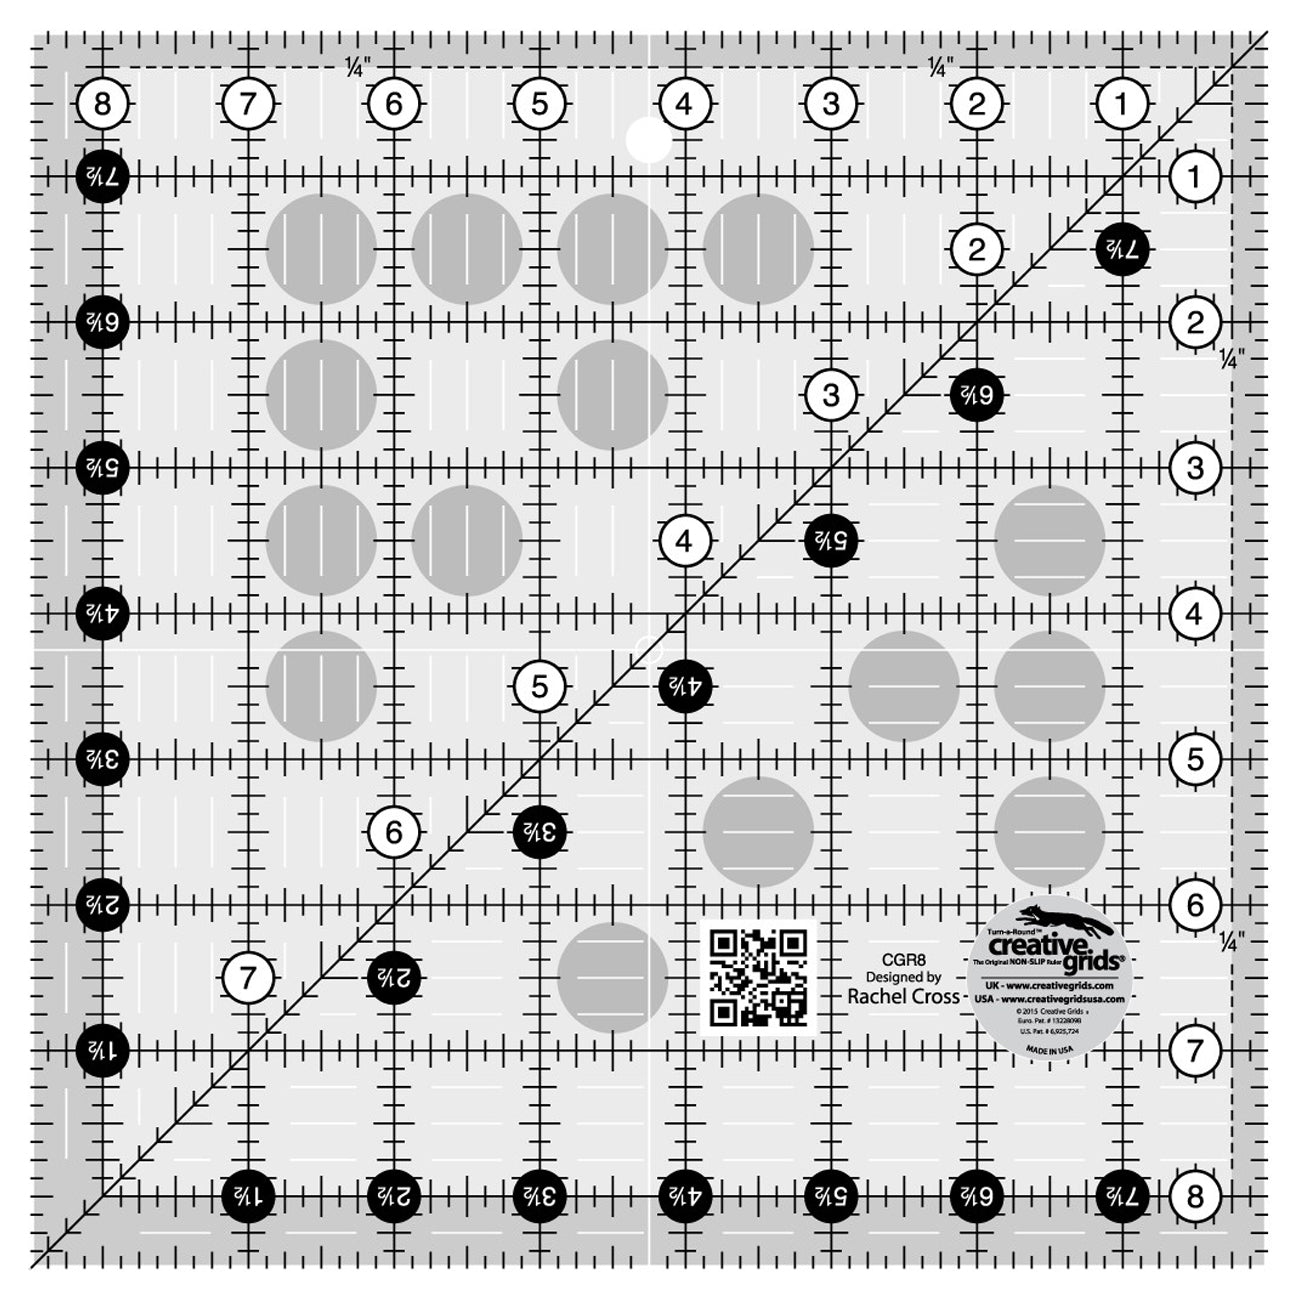 Creative Grids 8-1/2-Inch Square Quilt Ruler (CGR8)